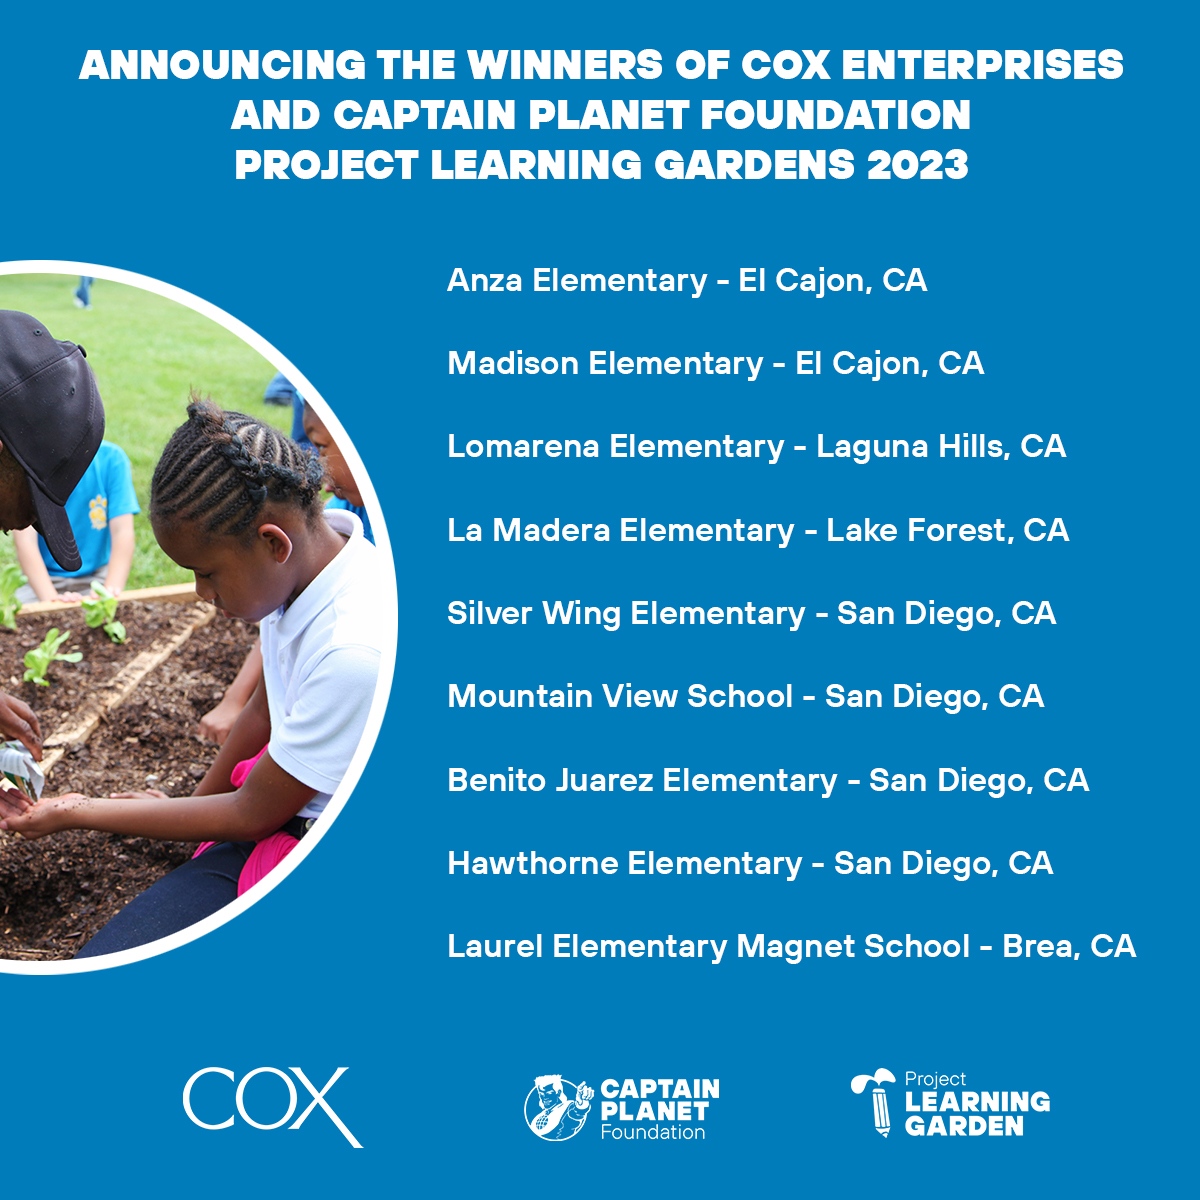 We’re thrilled to announce the recipients of 18 new Project Learning Gardens (PLG) at elementary schools in Arizona, California, and Georgia, thanks to the support of @CoxEnterprises. Thanks to Cox Enterprises for their generous support of PLG!